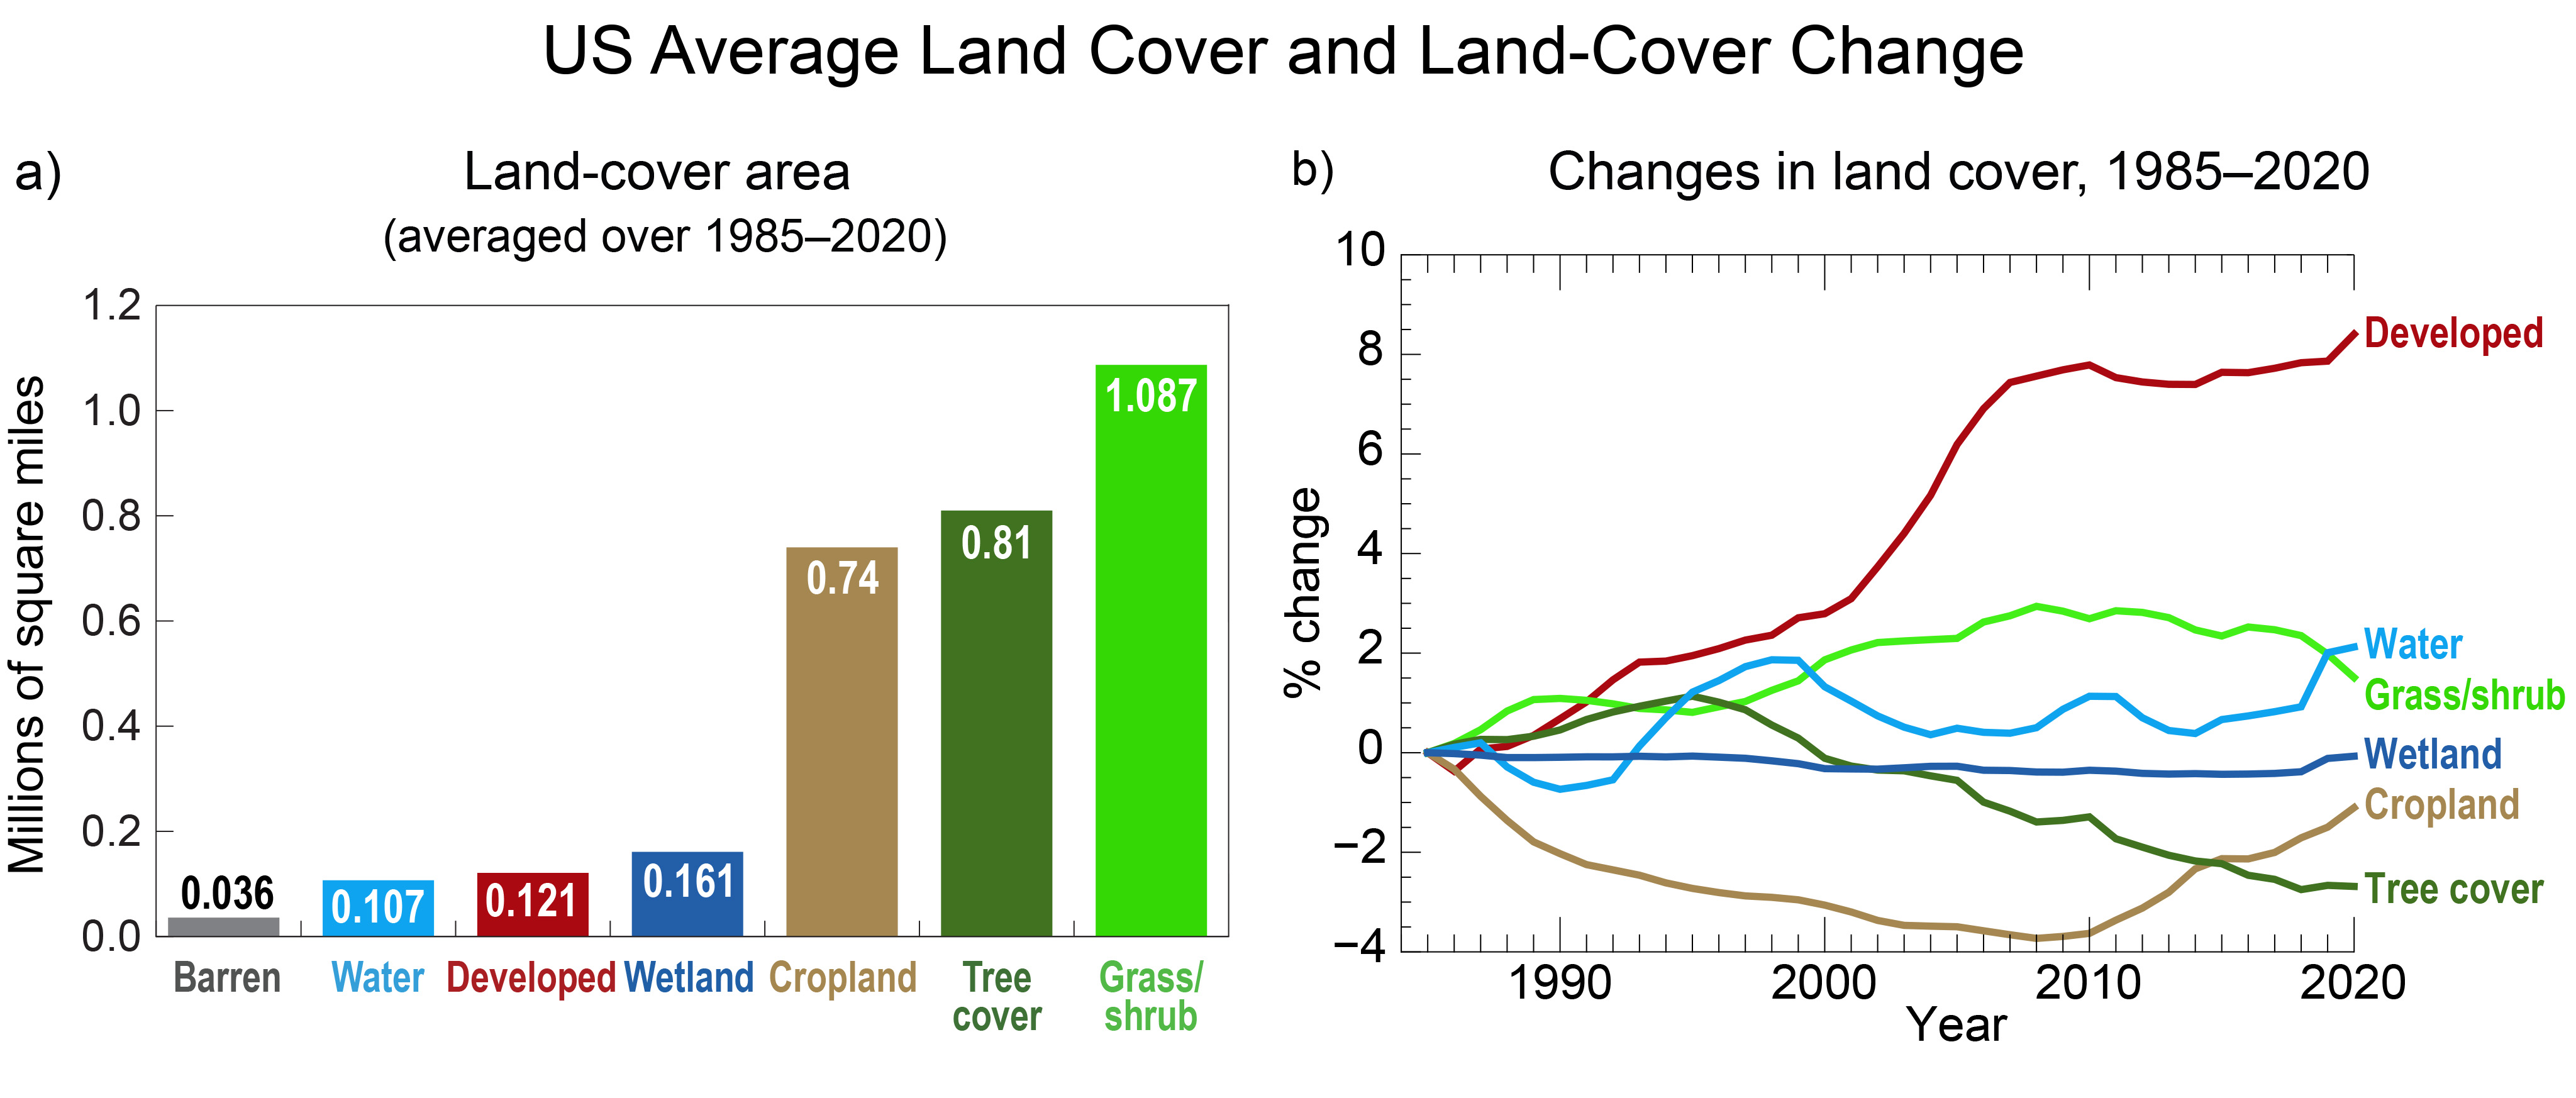 US Average Land Cover and Land-Cover Change